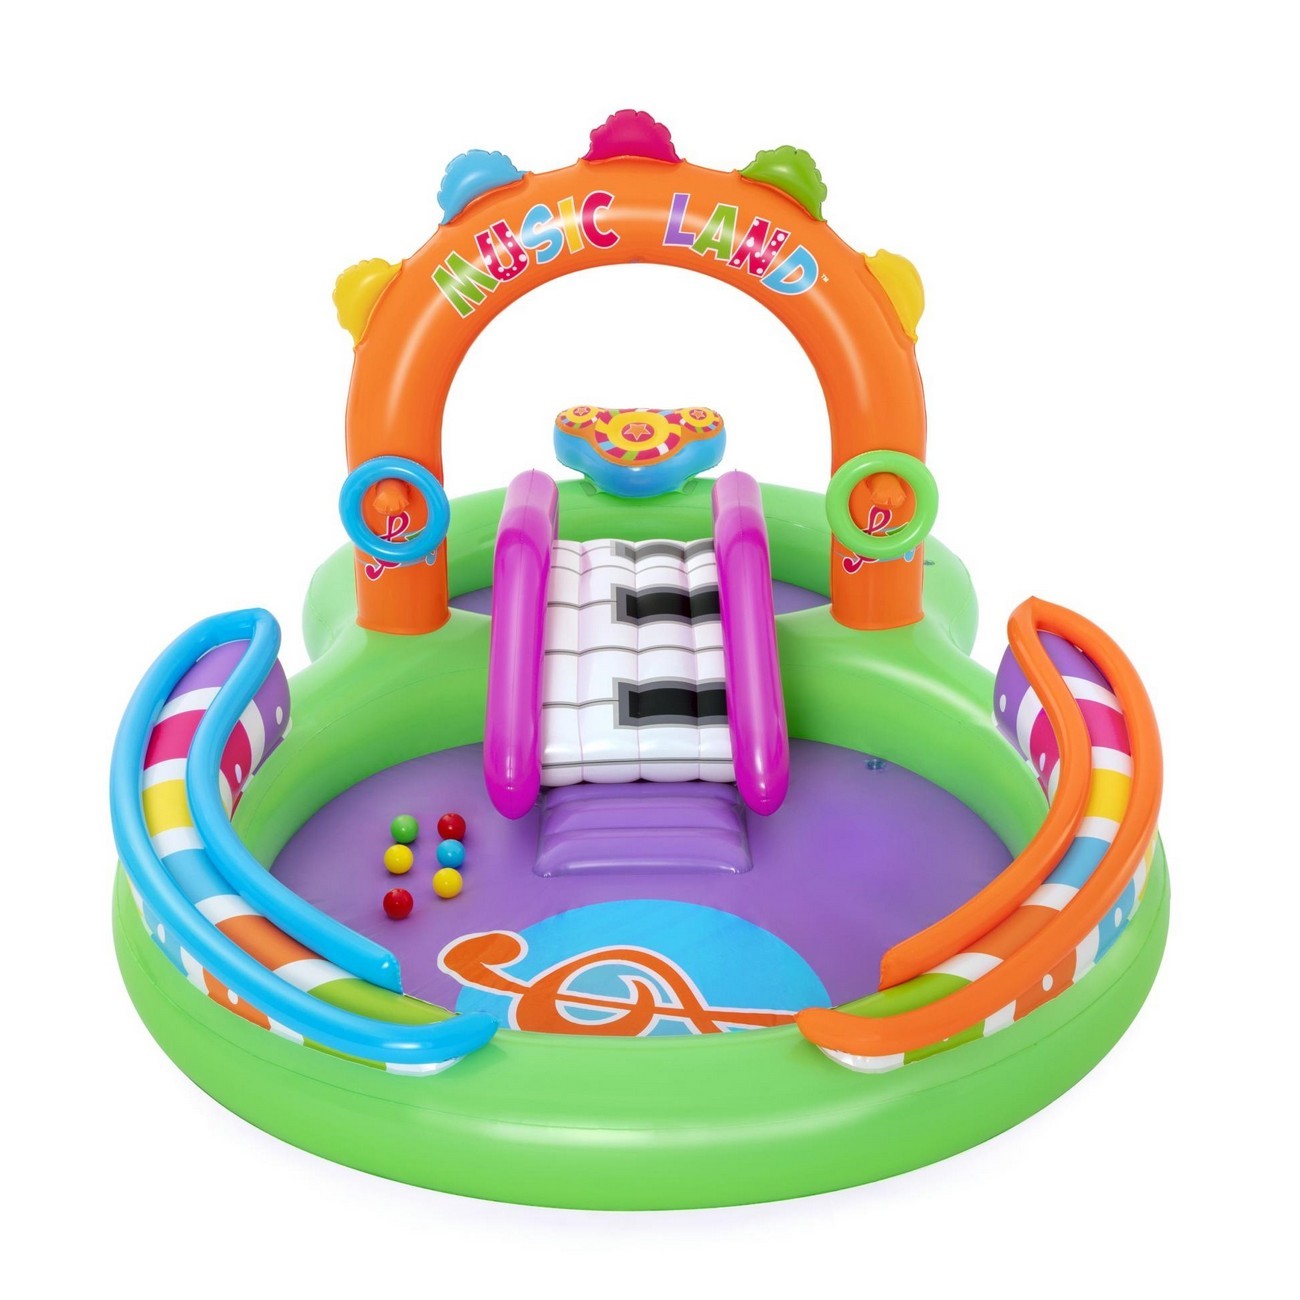 Alberca Inflable Ovalada Piscina Bestway 53117 349l